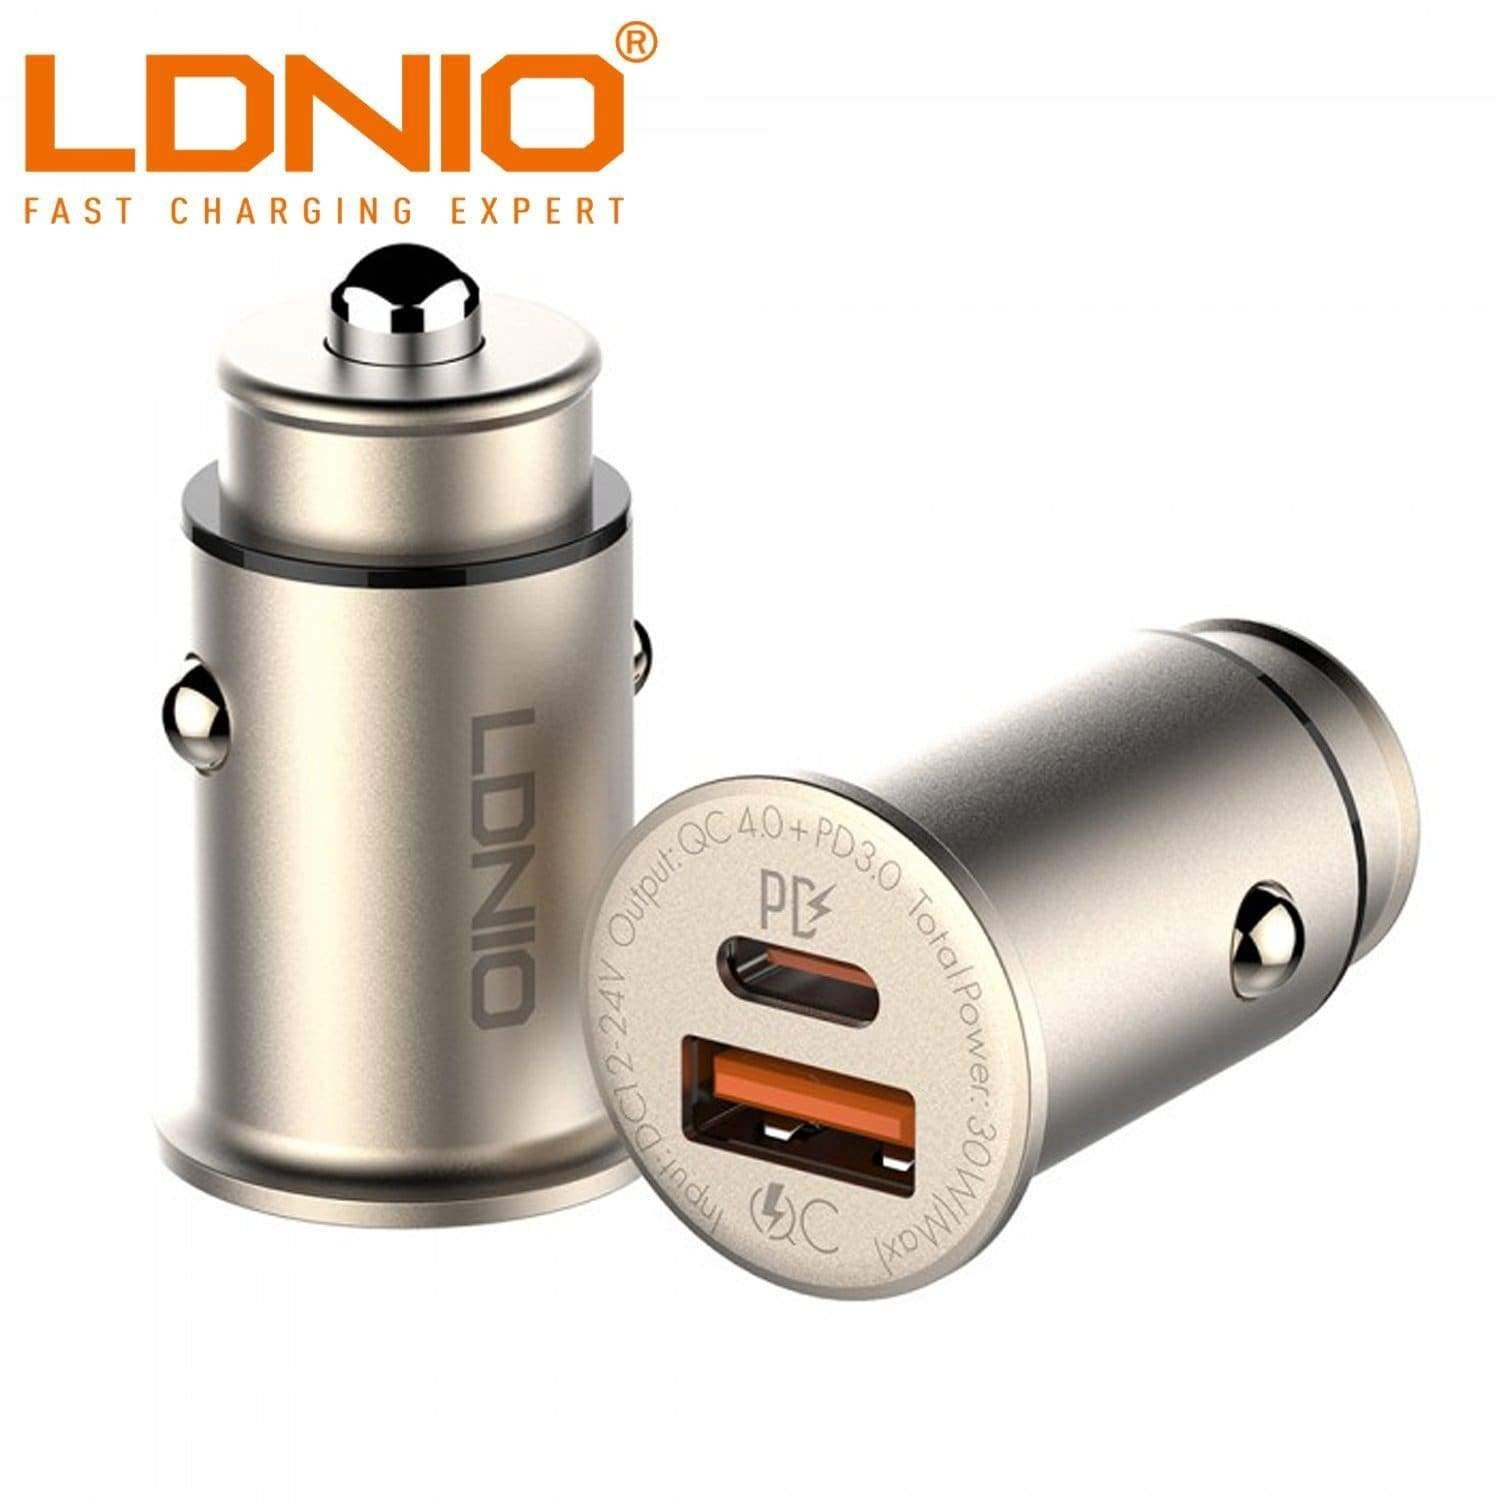 LDNIO C506Q TYPE-C PD + 30W QC4.0 SINGLE USB PORT FAST CHARGE CAR CHARGER | Shopna Online Store .